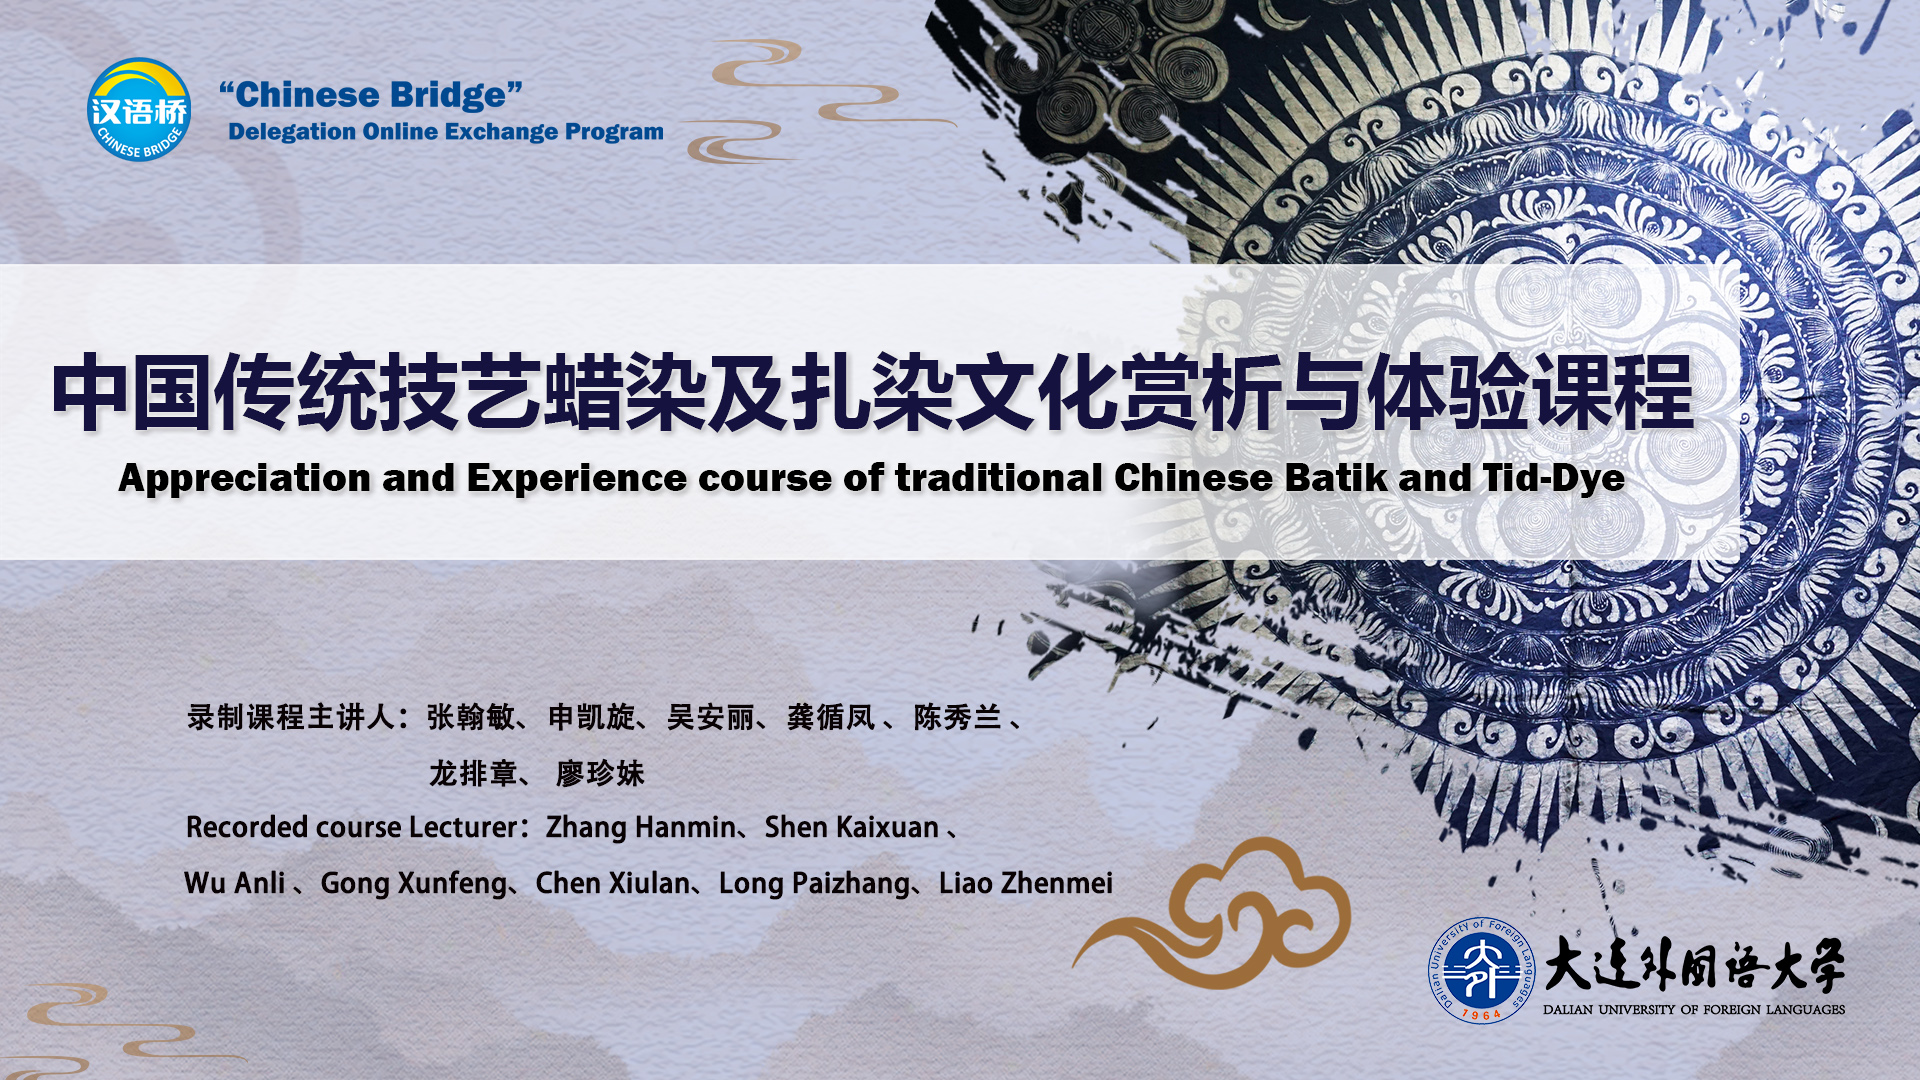 Appreciation  and  Experience  Course of Traditional  Chinese Batik and Tie-dye